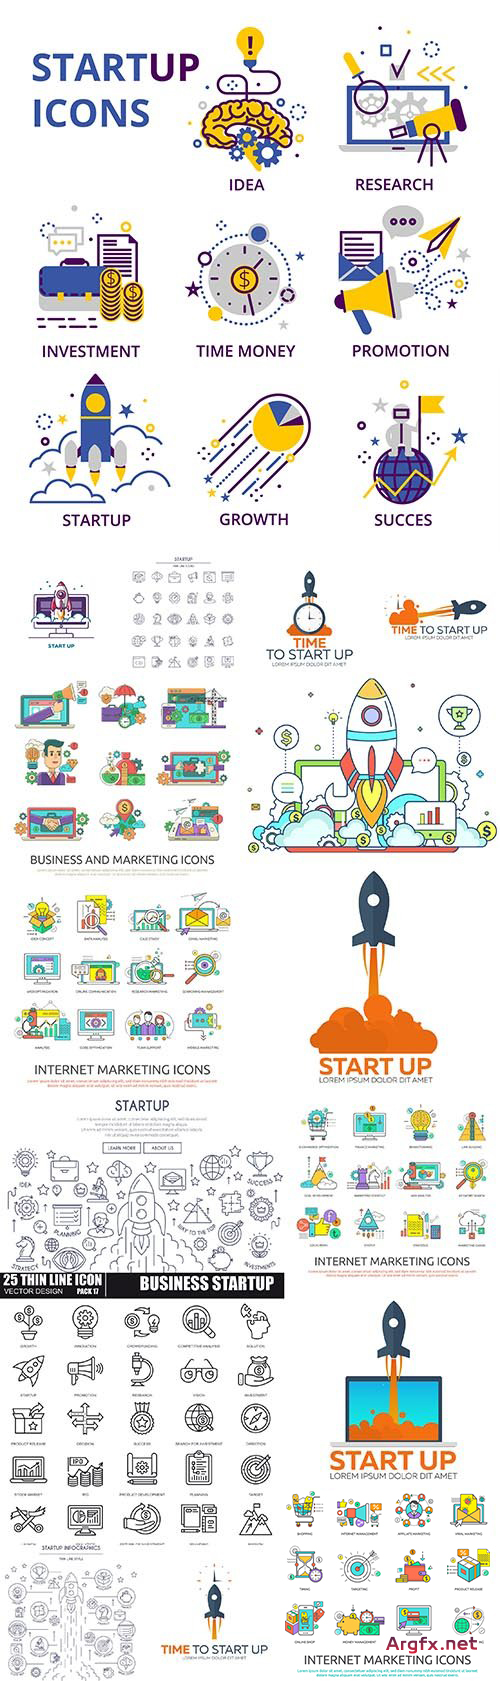 Start Up Business Icon and Logos - Internet Marketing